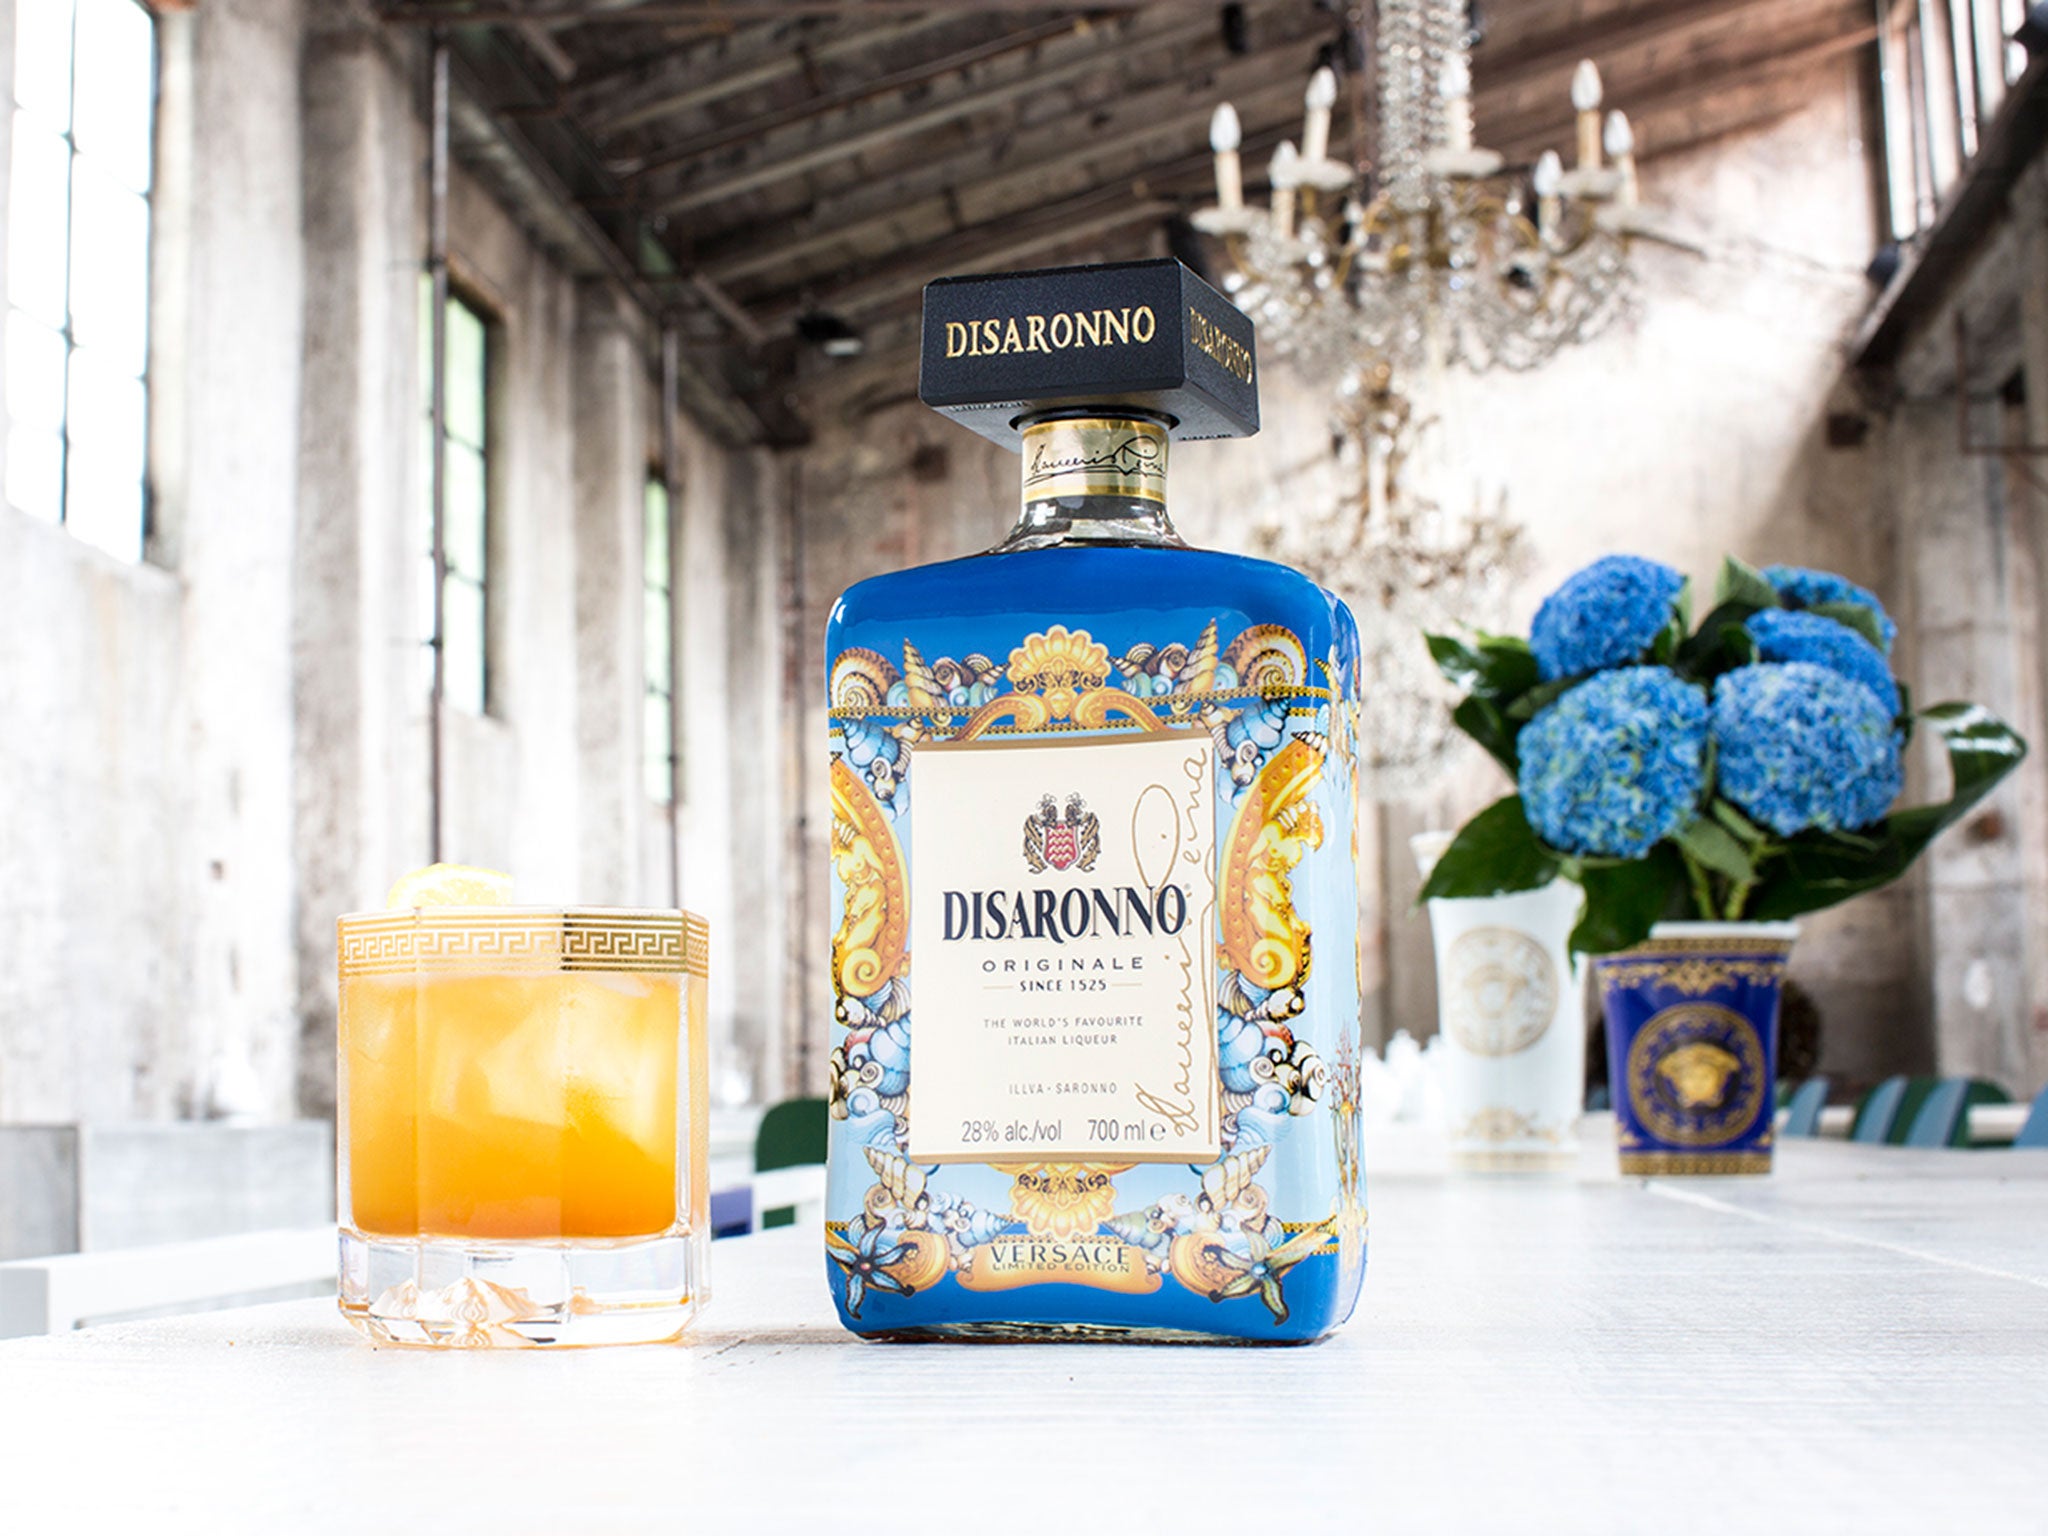 Italian drinks company Illva Saronno, the makers of Disaronno, are launching a new product in the UK costing £250 a bottle